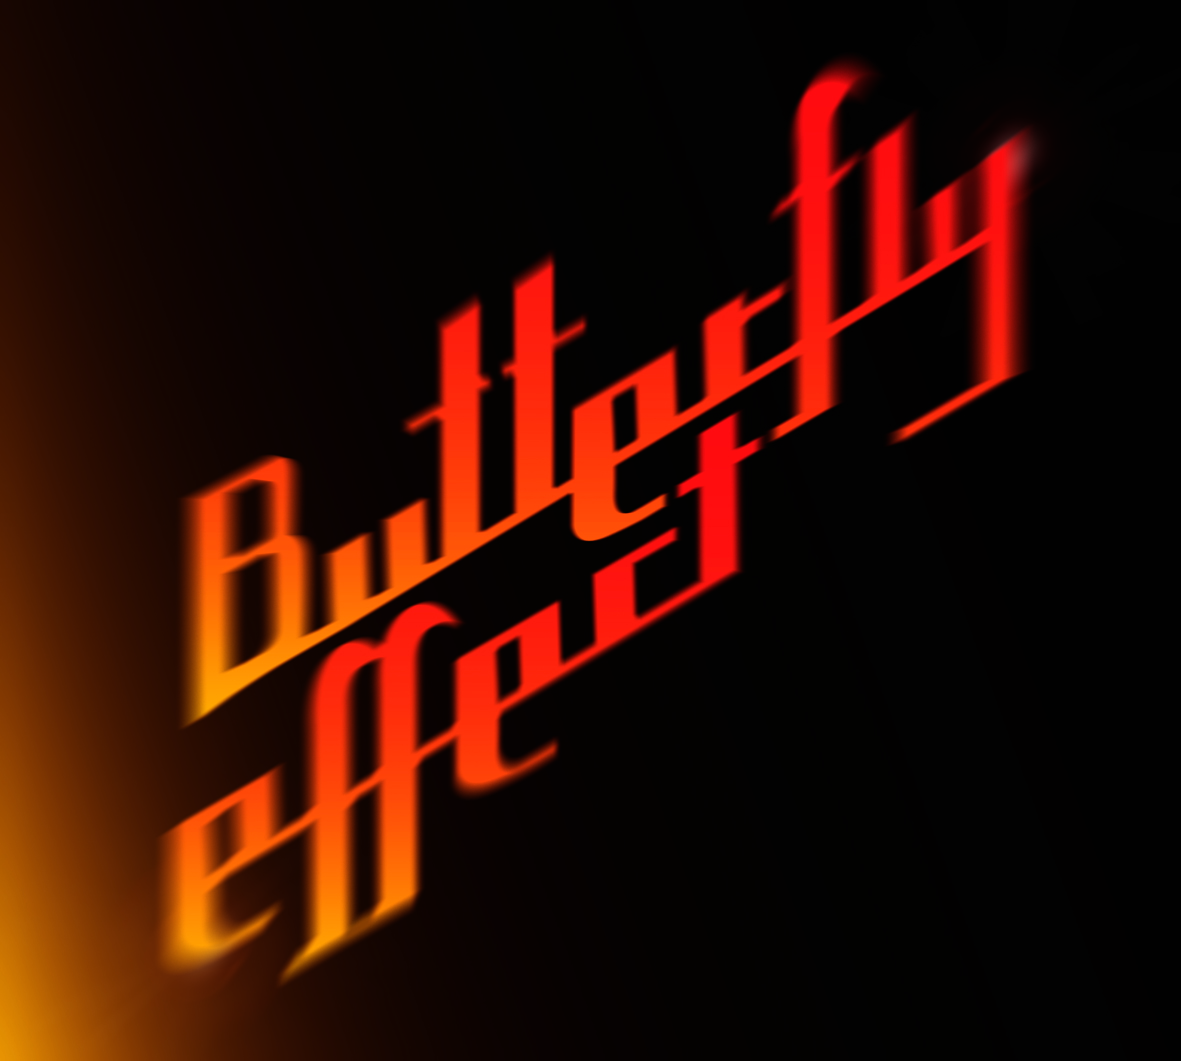 Butterfly Effect – Waiting for a Spring